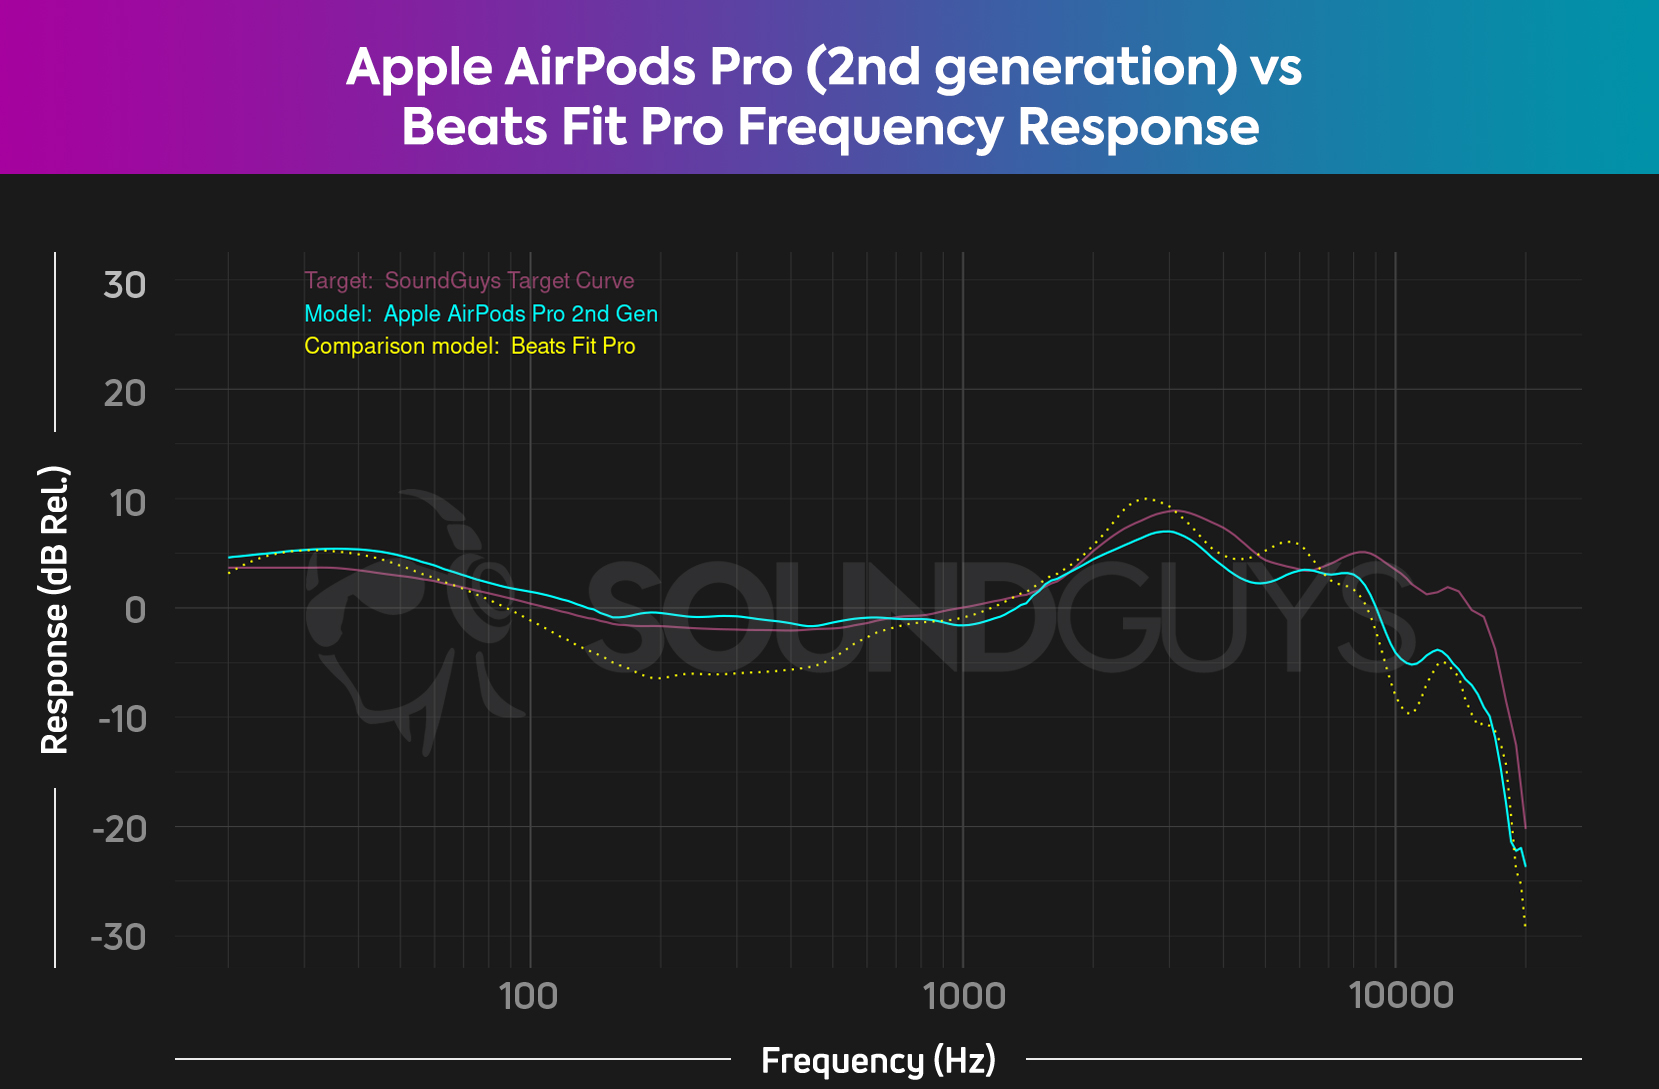 The frequency response chart for the Apple AirPods Pro (2nd generation) and the Beats Fit Pro, showing that both have a bass emphasis.